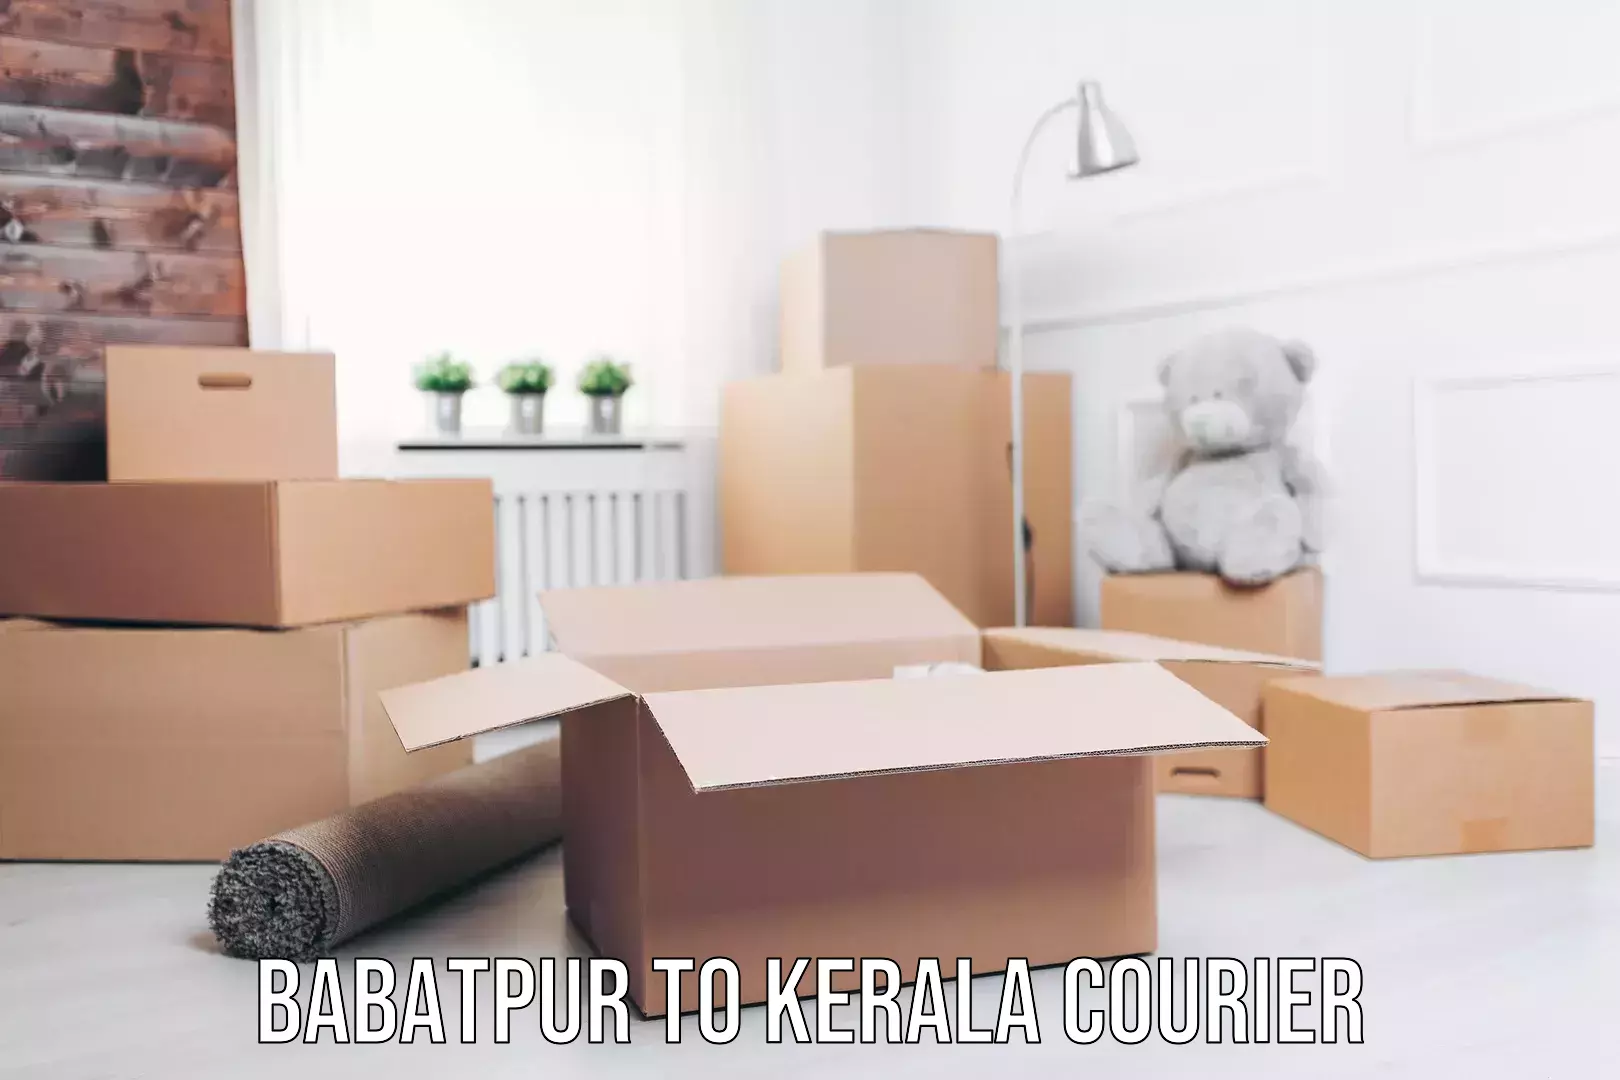 Cargo delivery service Babatpur to Kerala